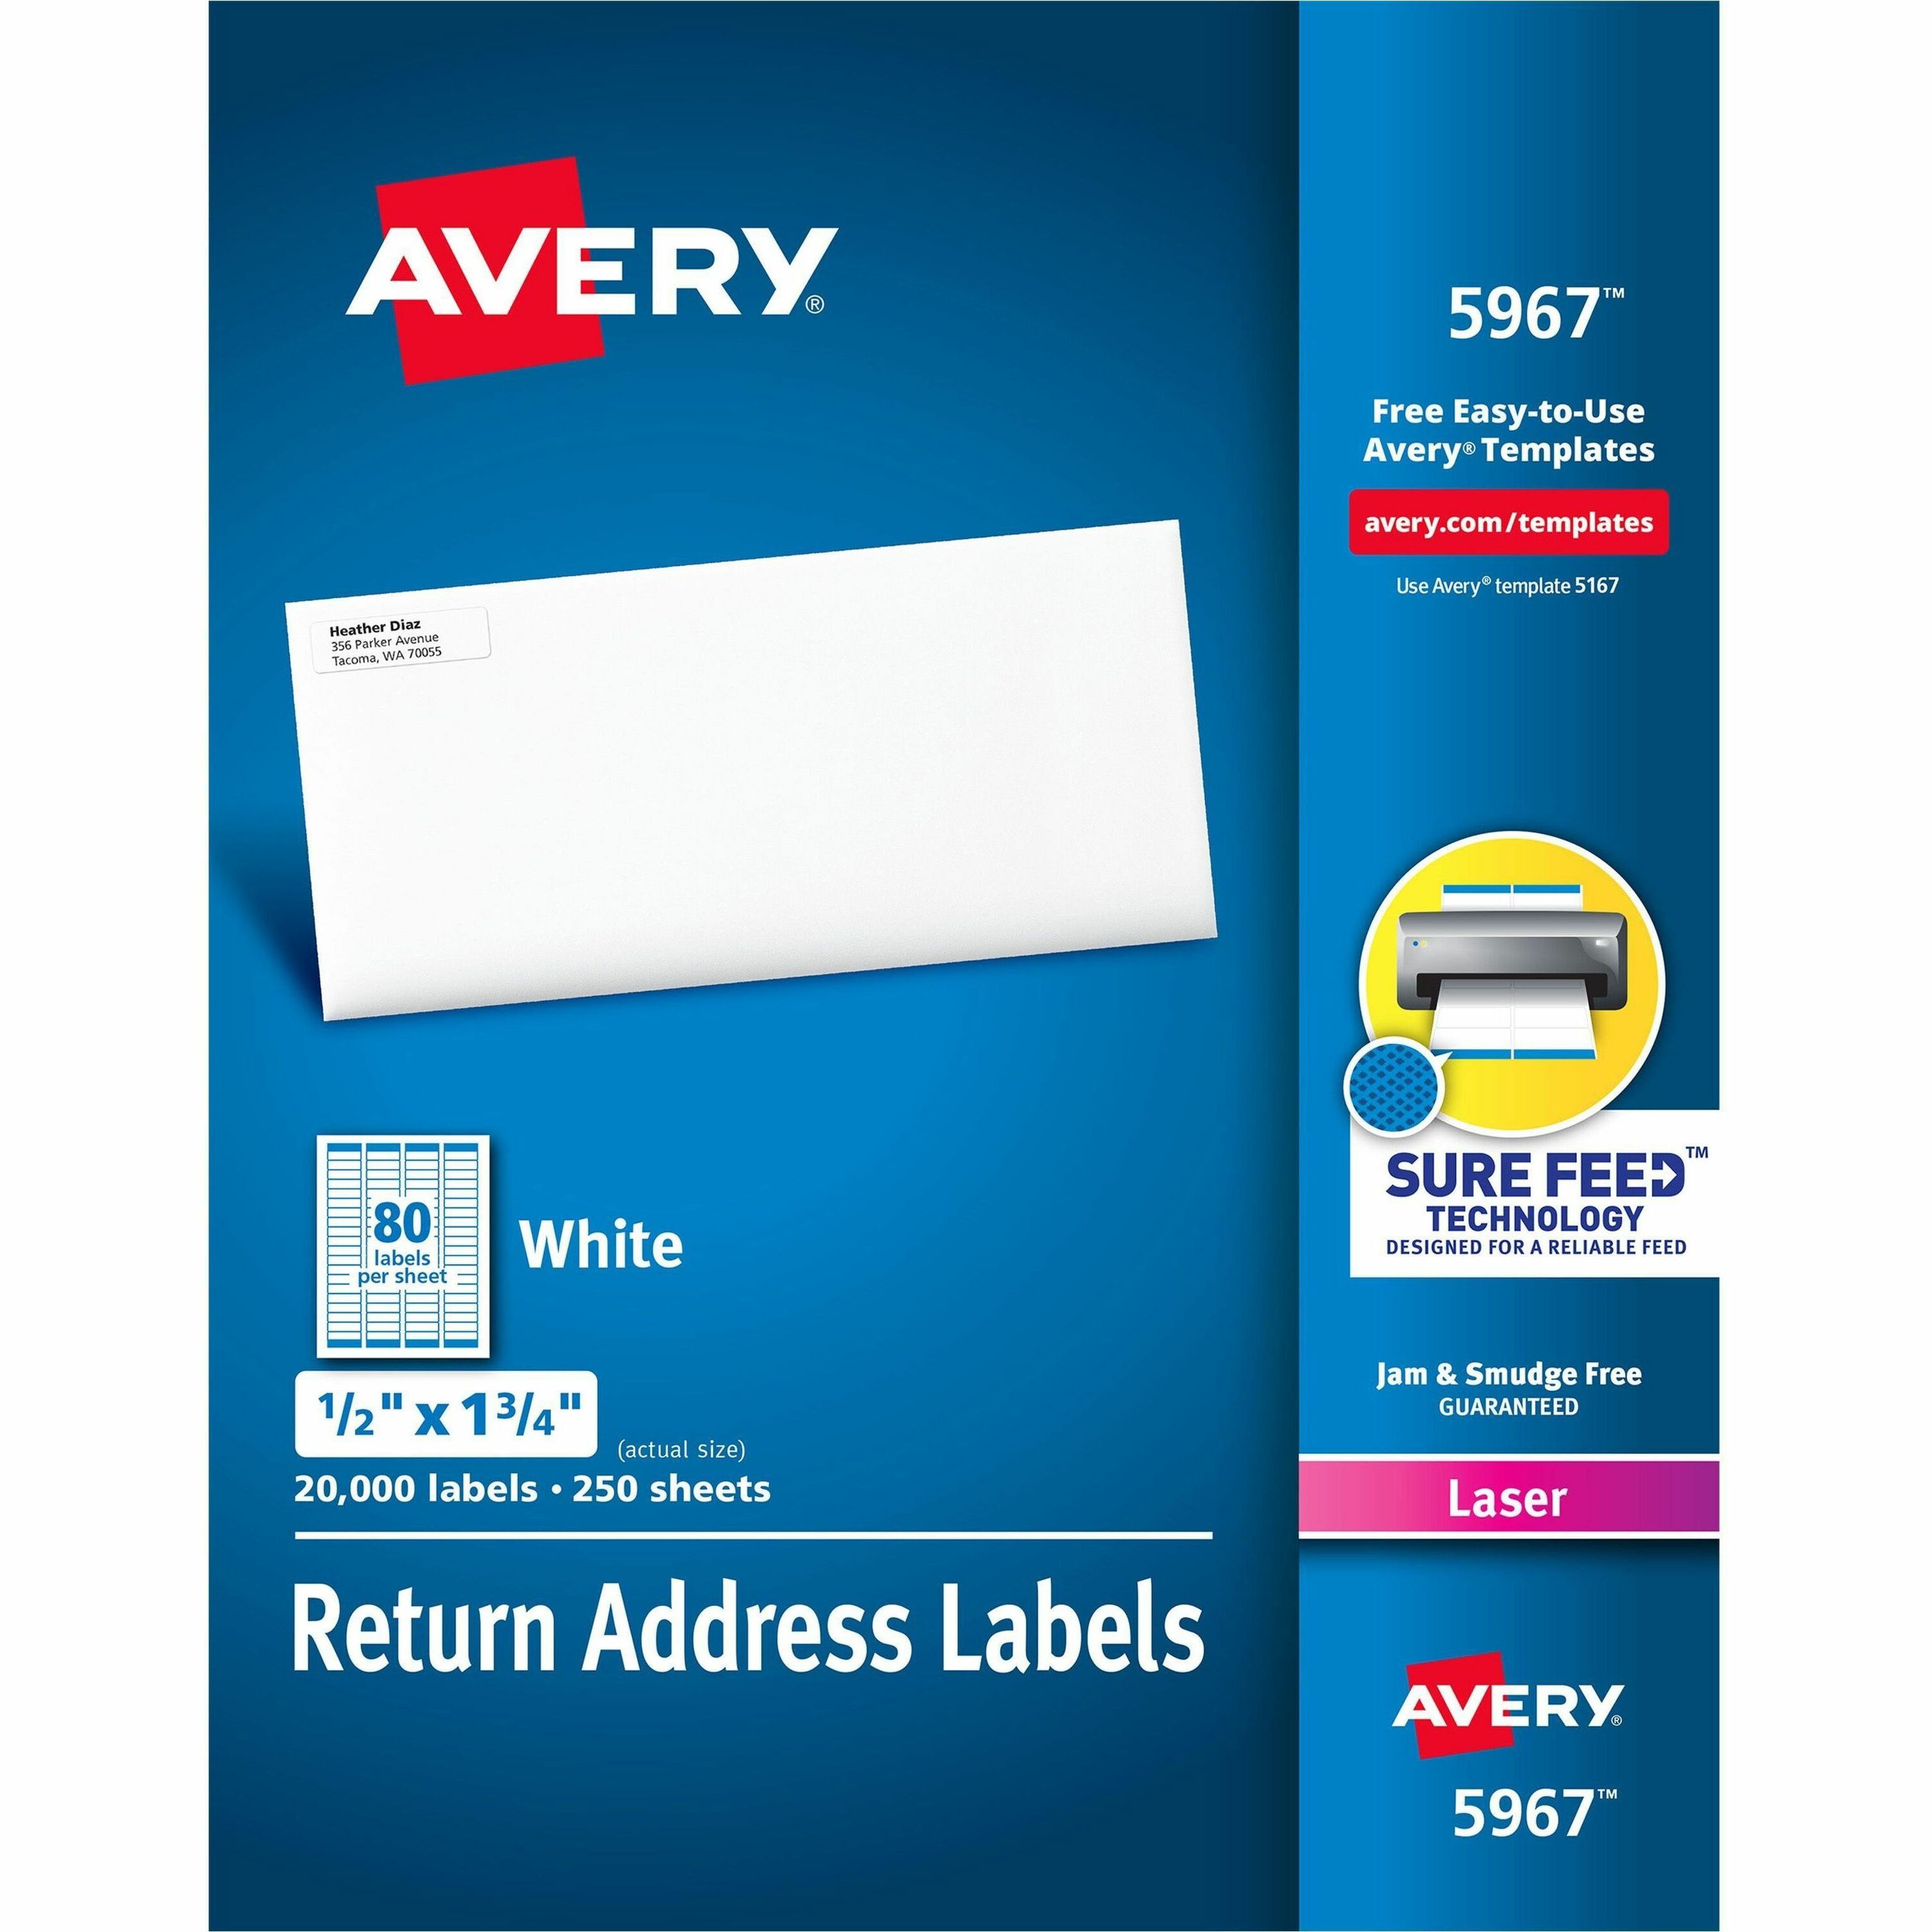 Avery Easy Peel Return Address Labels 2 3 X1 3 4 6 000 Labels 5155 43 64 Height X 1 3 4 Width Rectangle Laser White Paper 60 Forbes Office Solutions The shipping label is the most important document to ensure that your delivery is successful, and microsoft word includes an envelope template that you can adapt to prepare a shipping label for. www redcheetah com